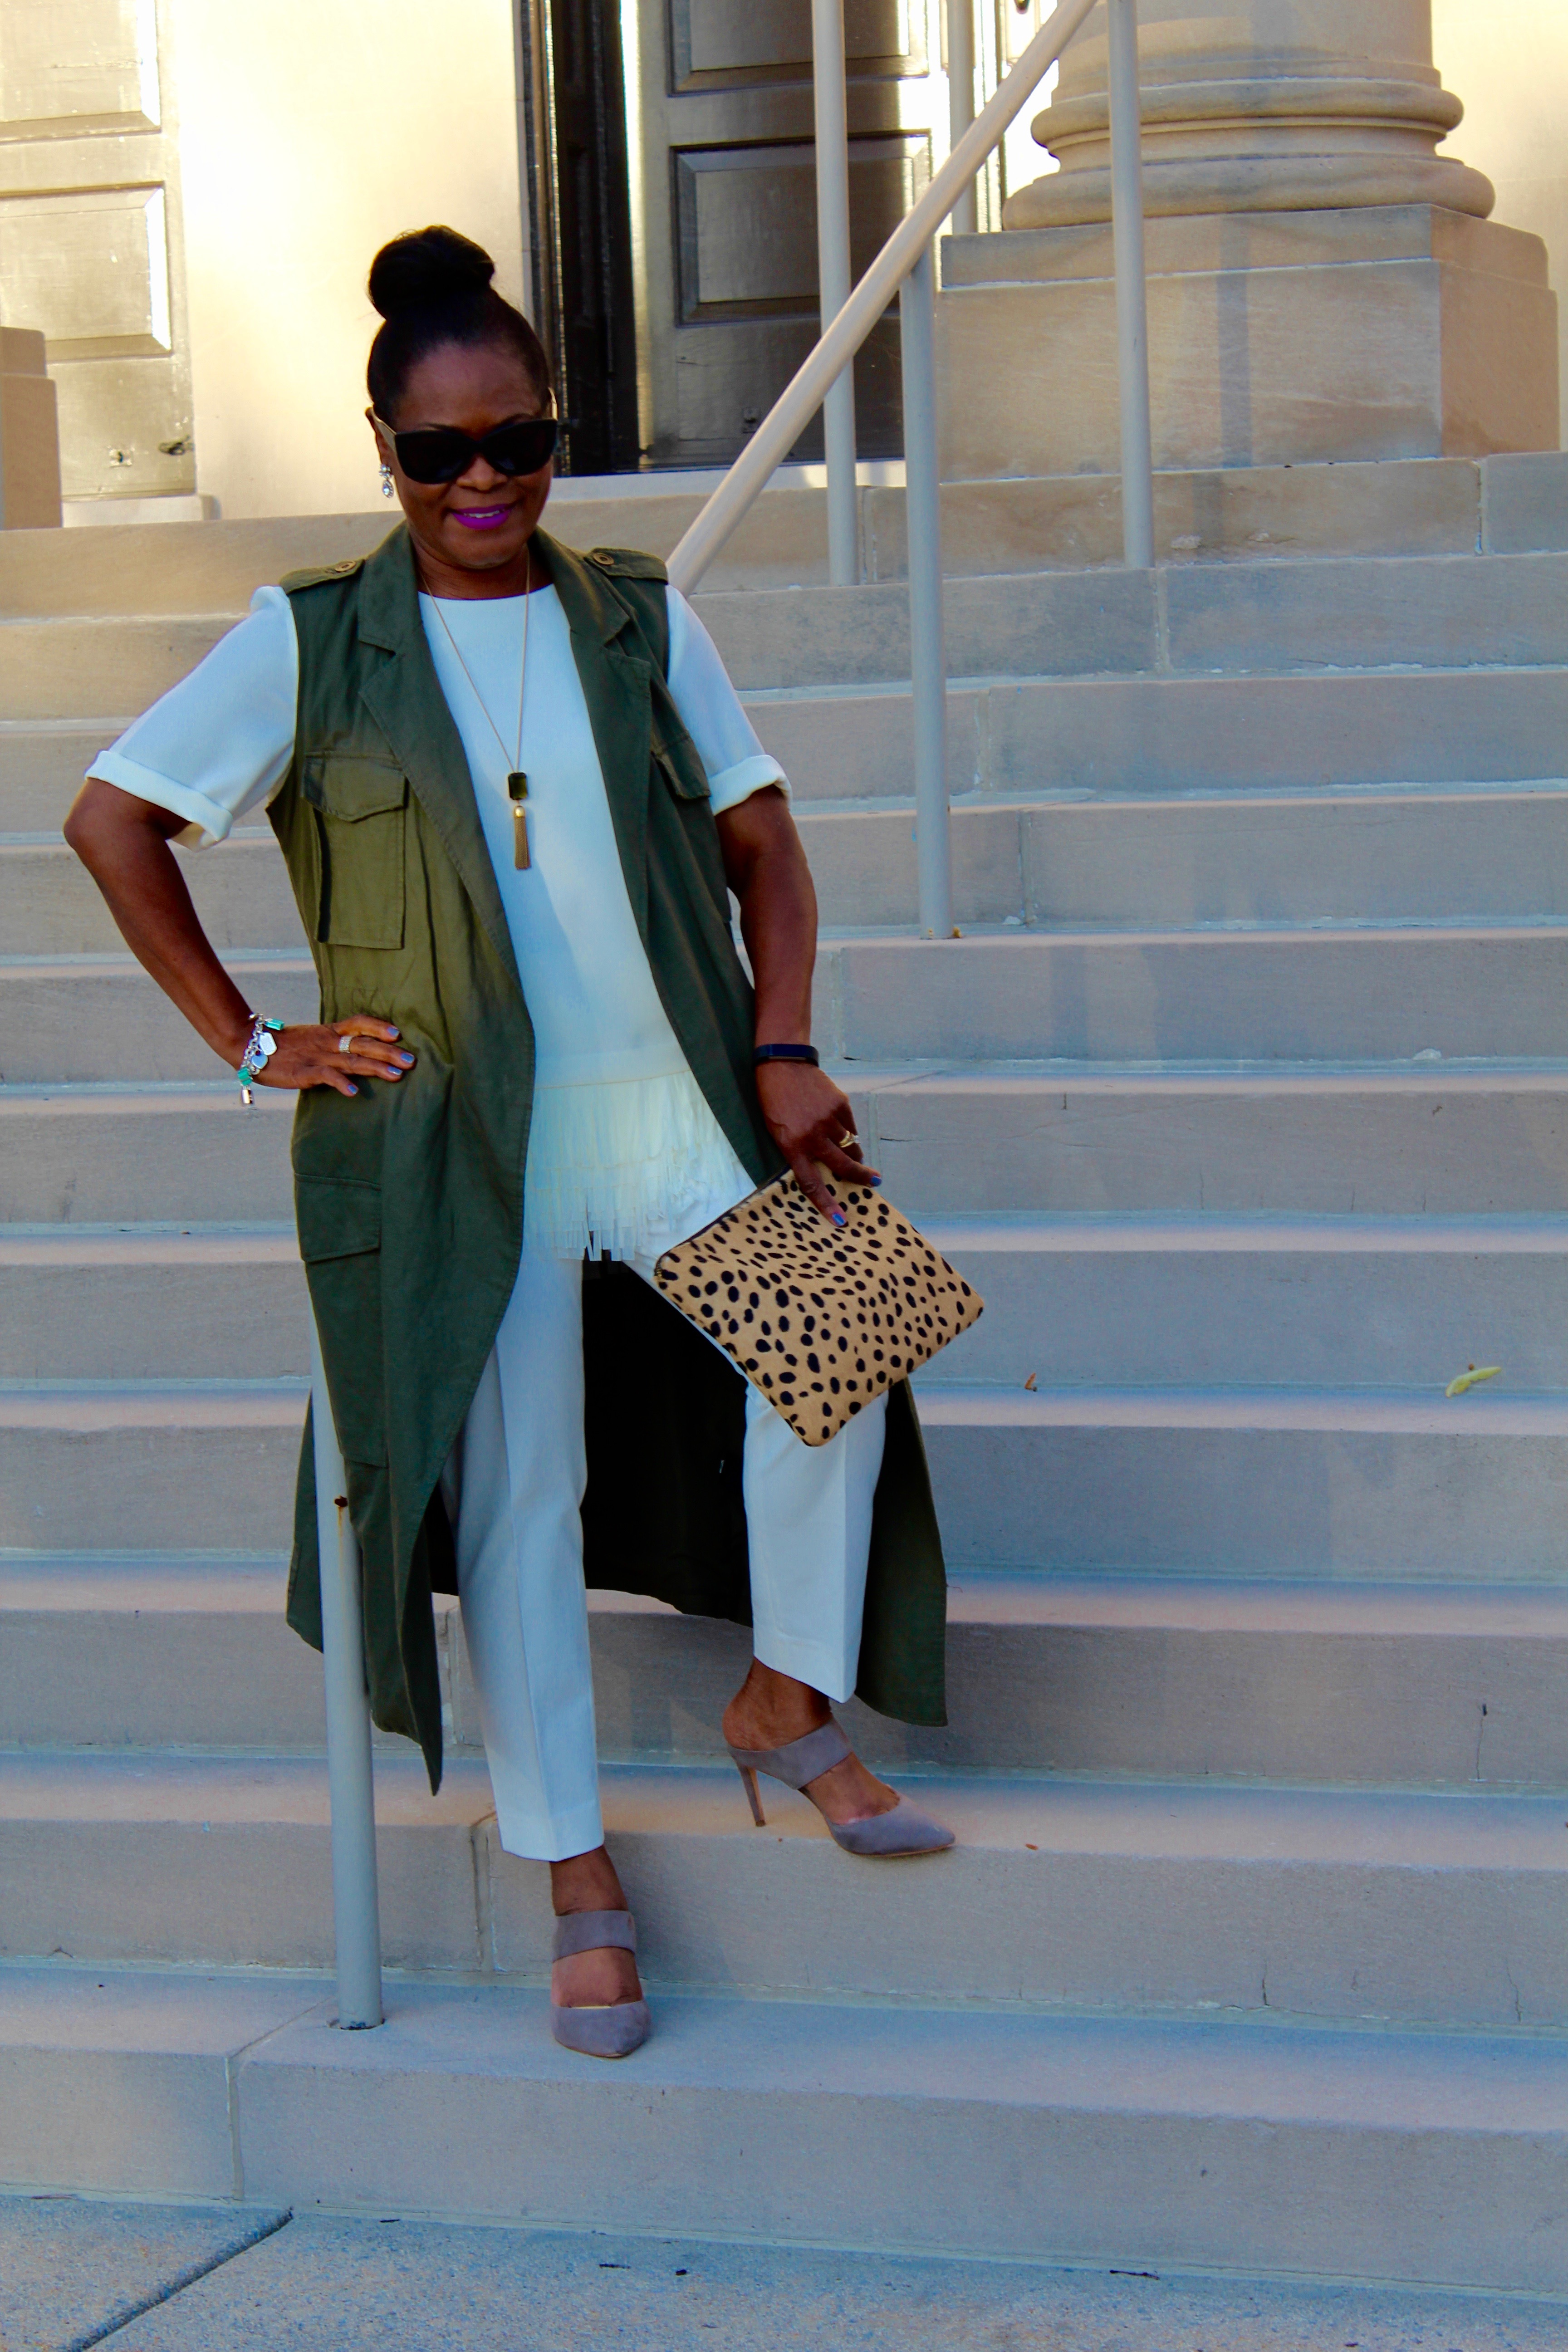 Wearing: Target Who What Where Collection Long Fatigue Vest, Banana Republic fringed top, J. Crew Pant, Boden Suede Slide with 2ChicDesigns calf-half clutch.